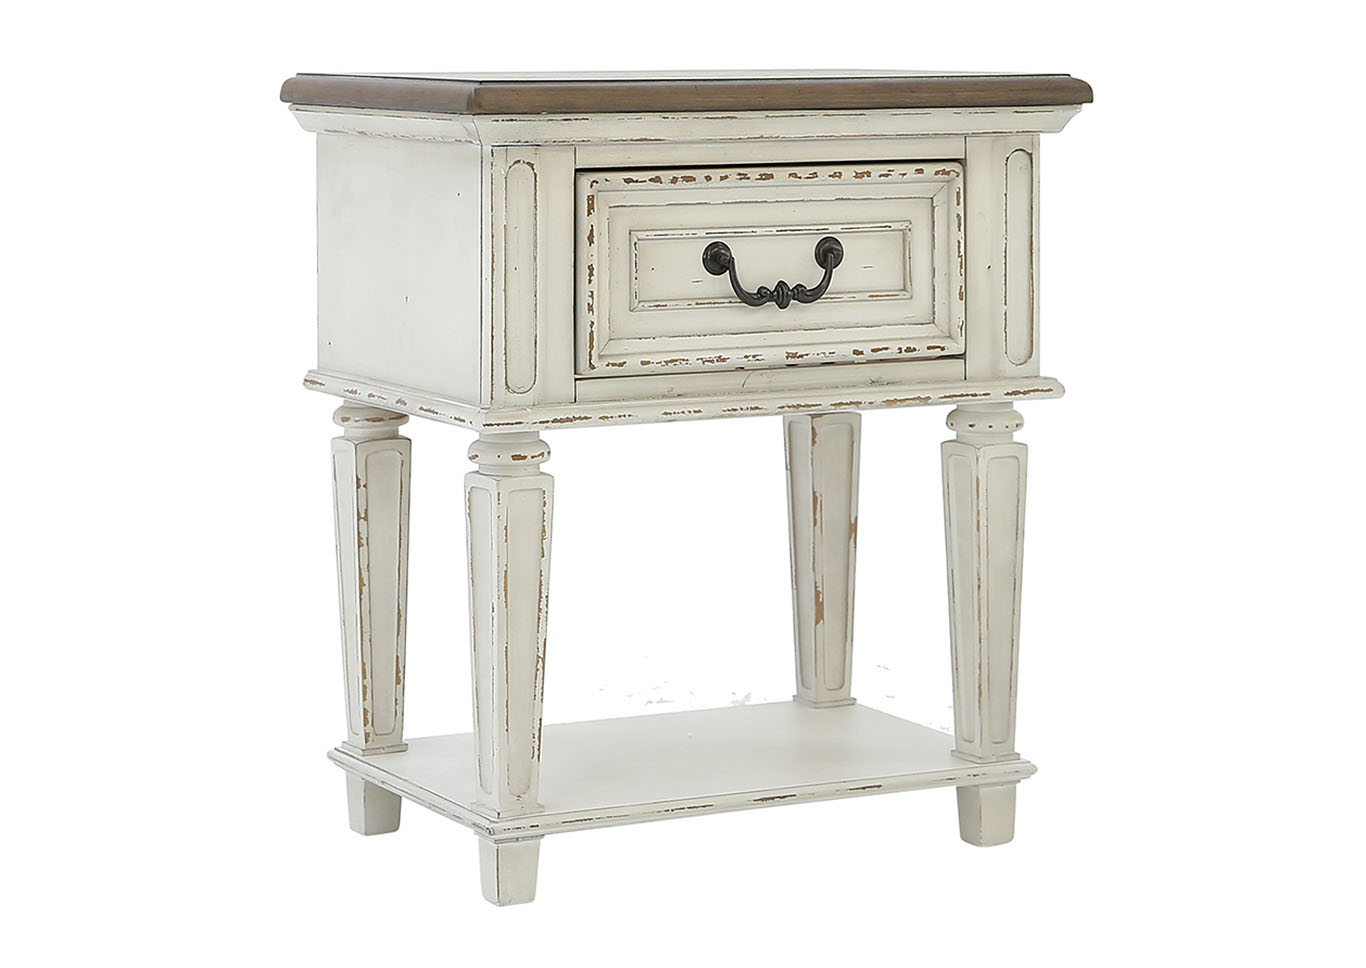 REALYN ONE DRAWER NIGHT STAND,ASHLEY FURNITURE INC.